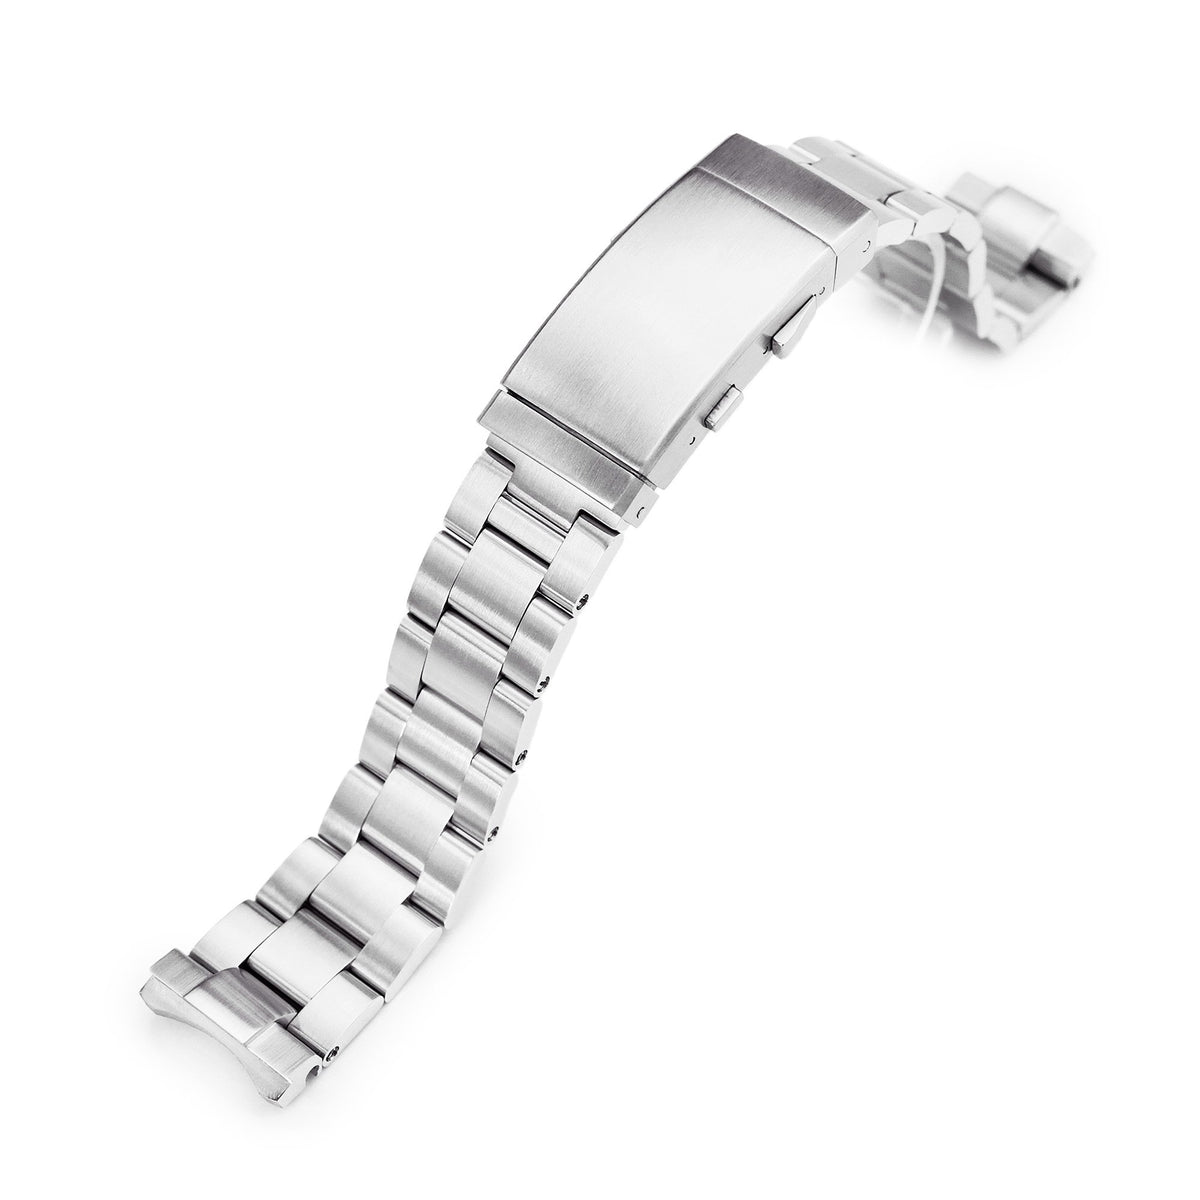 20mm Super-O Boyer 316L Stainless Steel Watch Band for Seiko SPB143 63Mas 40.5mm, Brushed Wetsuit Ratchet Buckle Strapcode Watch Bands